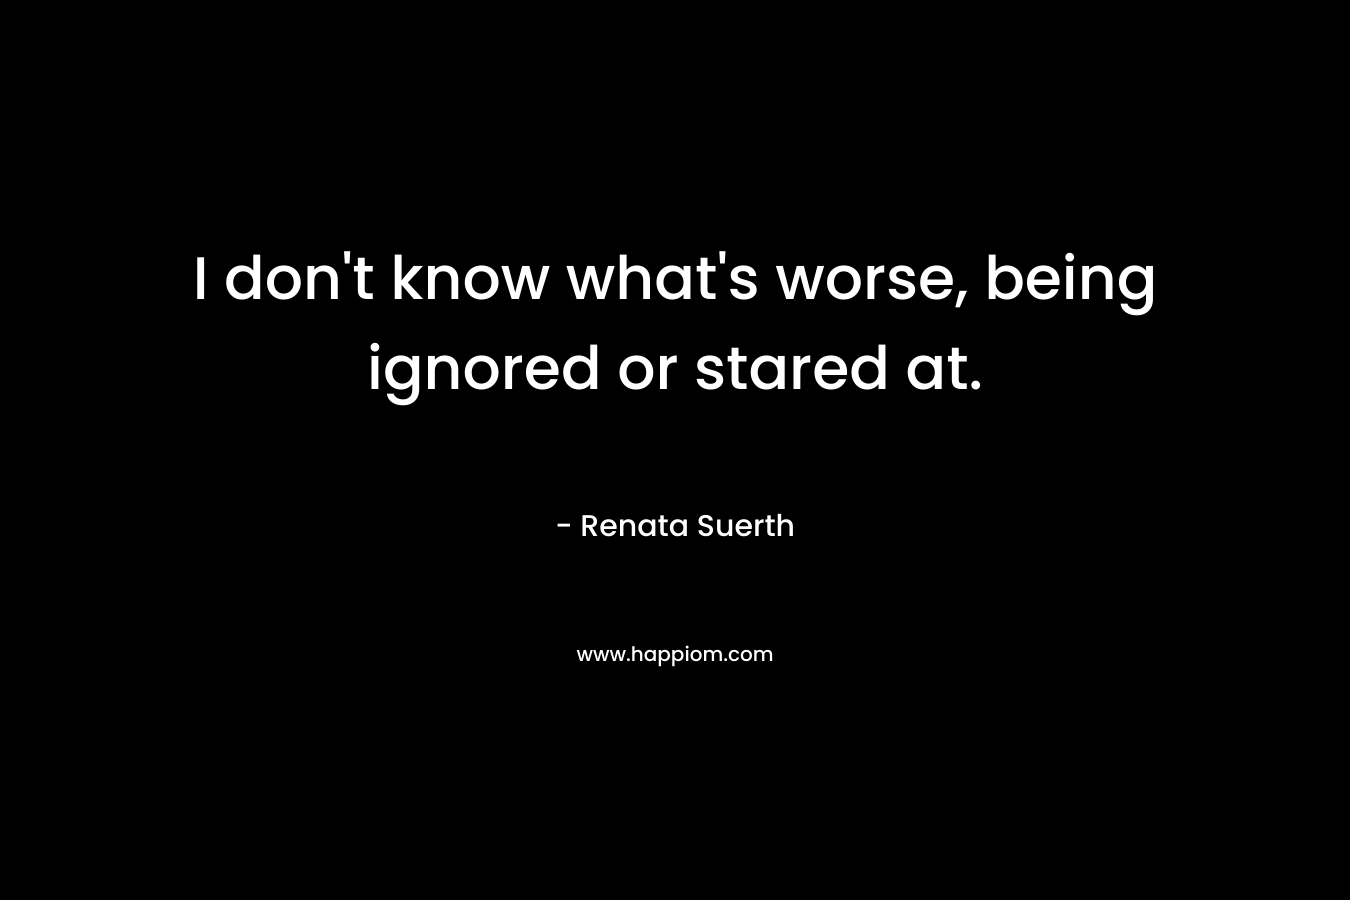 I don’t know what’s worse, being ignored or stared at. – Renata Suerth